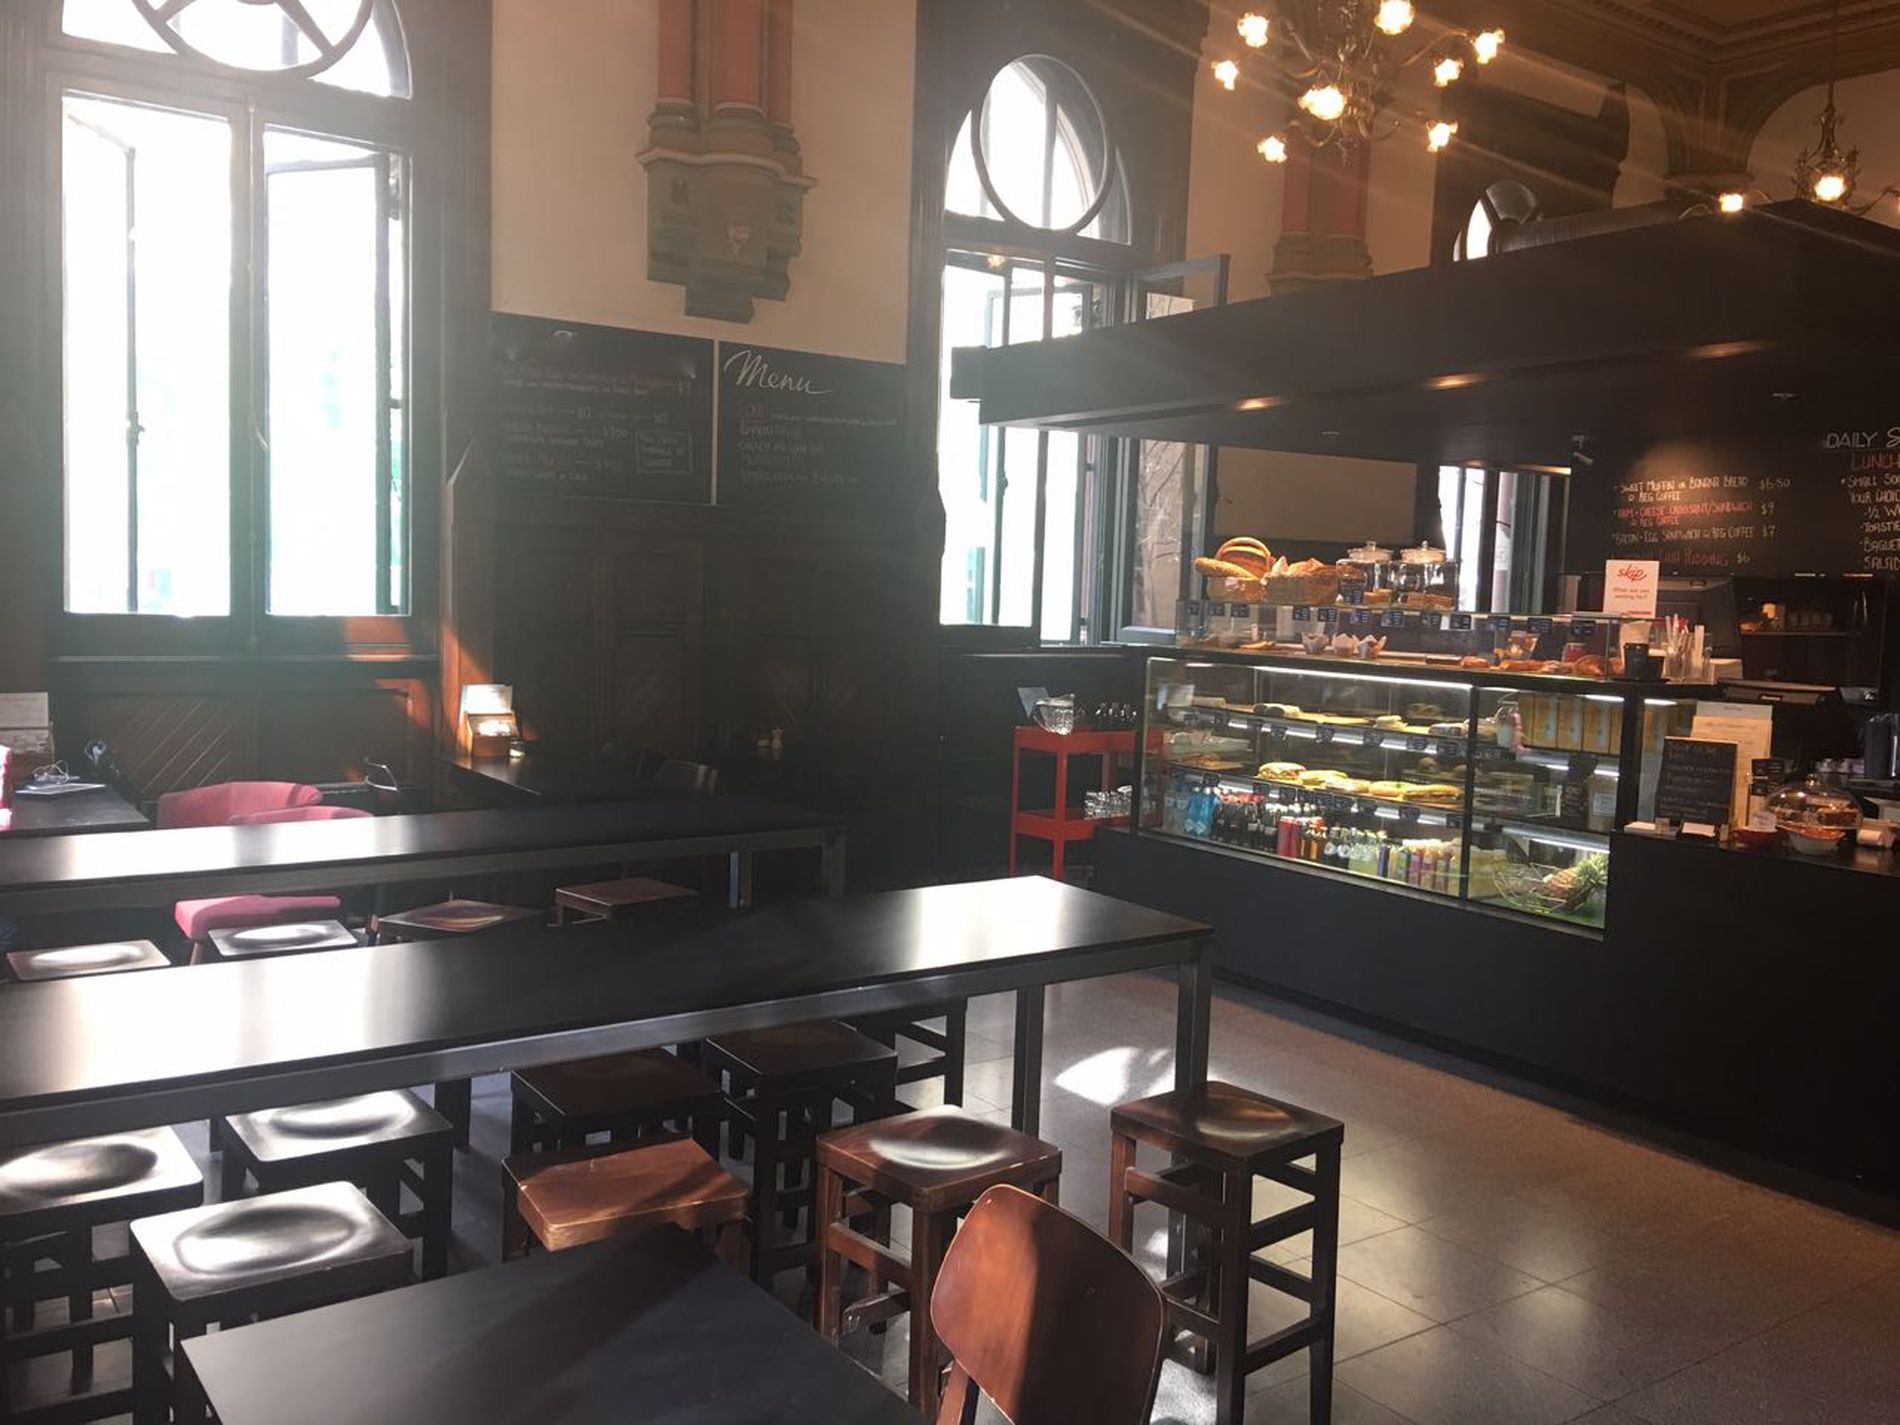 SOLD - 5 Day Cafe Business For Sale Melbourne CBD